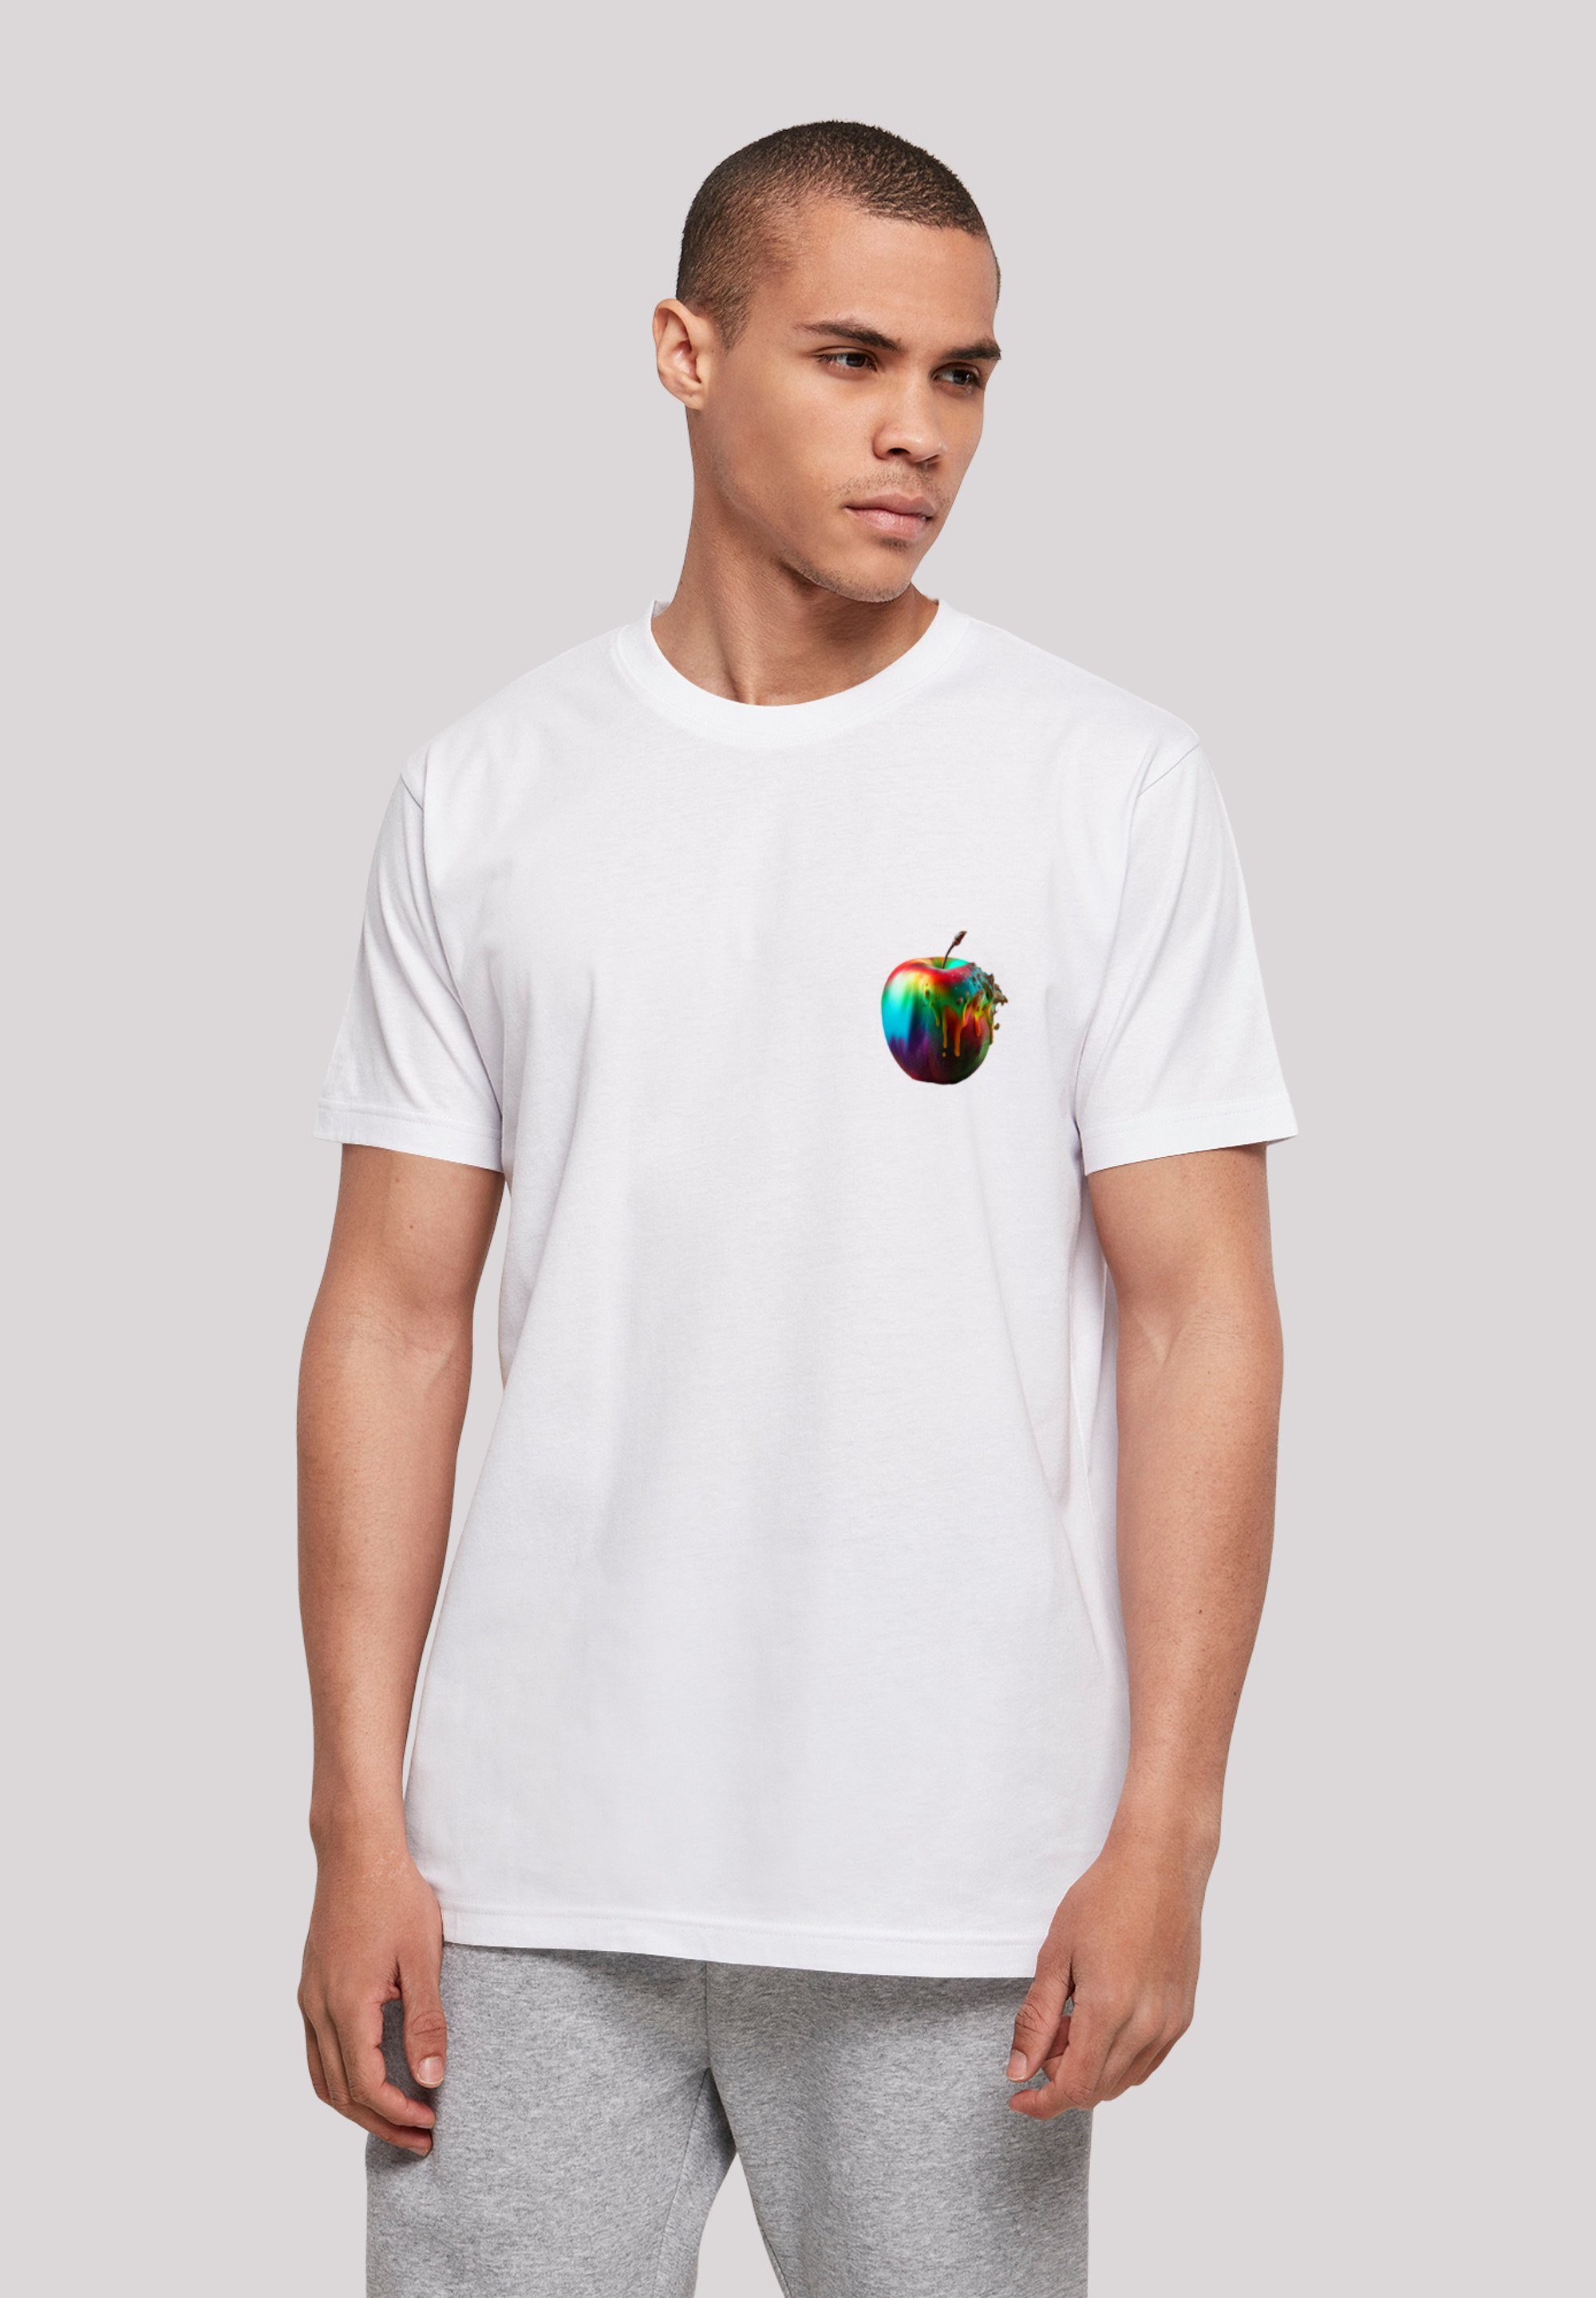 Colorfood Print T-Shirt weiß Collection Apple - Rainbow F4NT4STIC